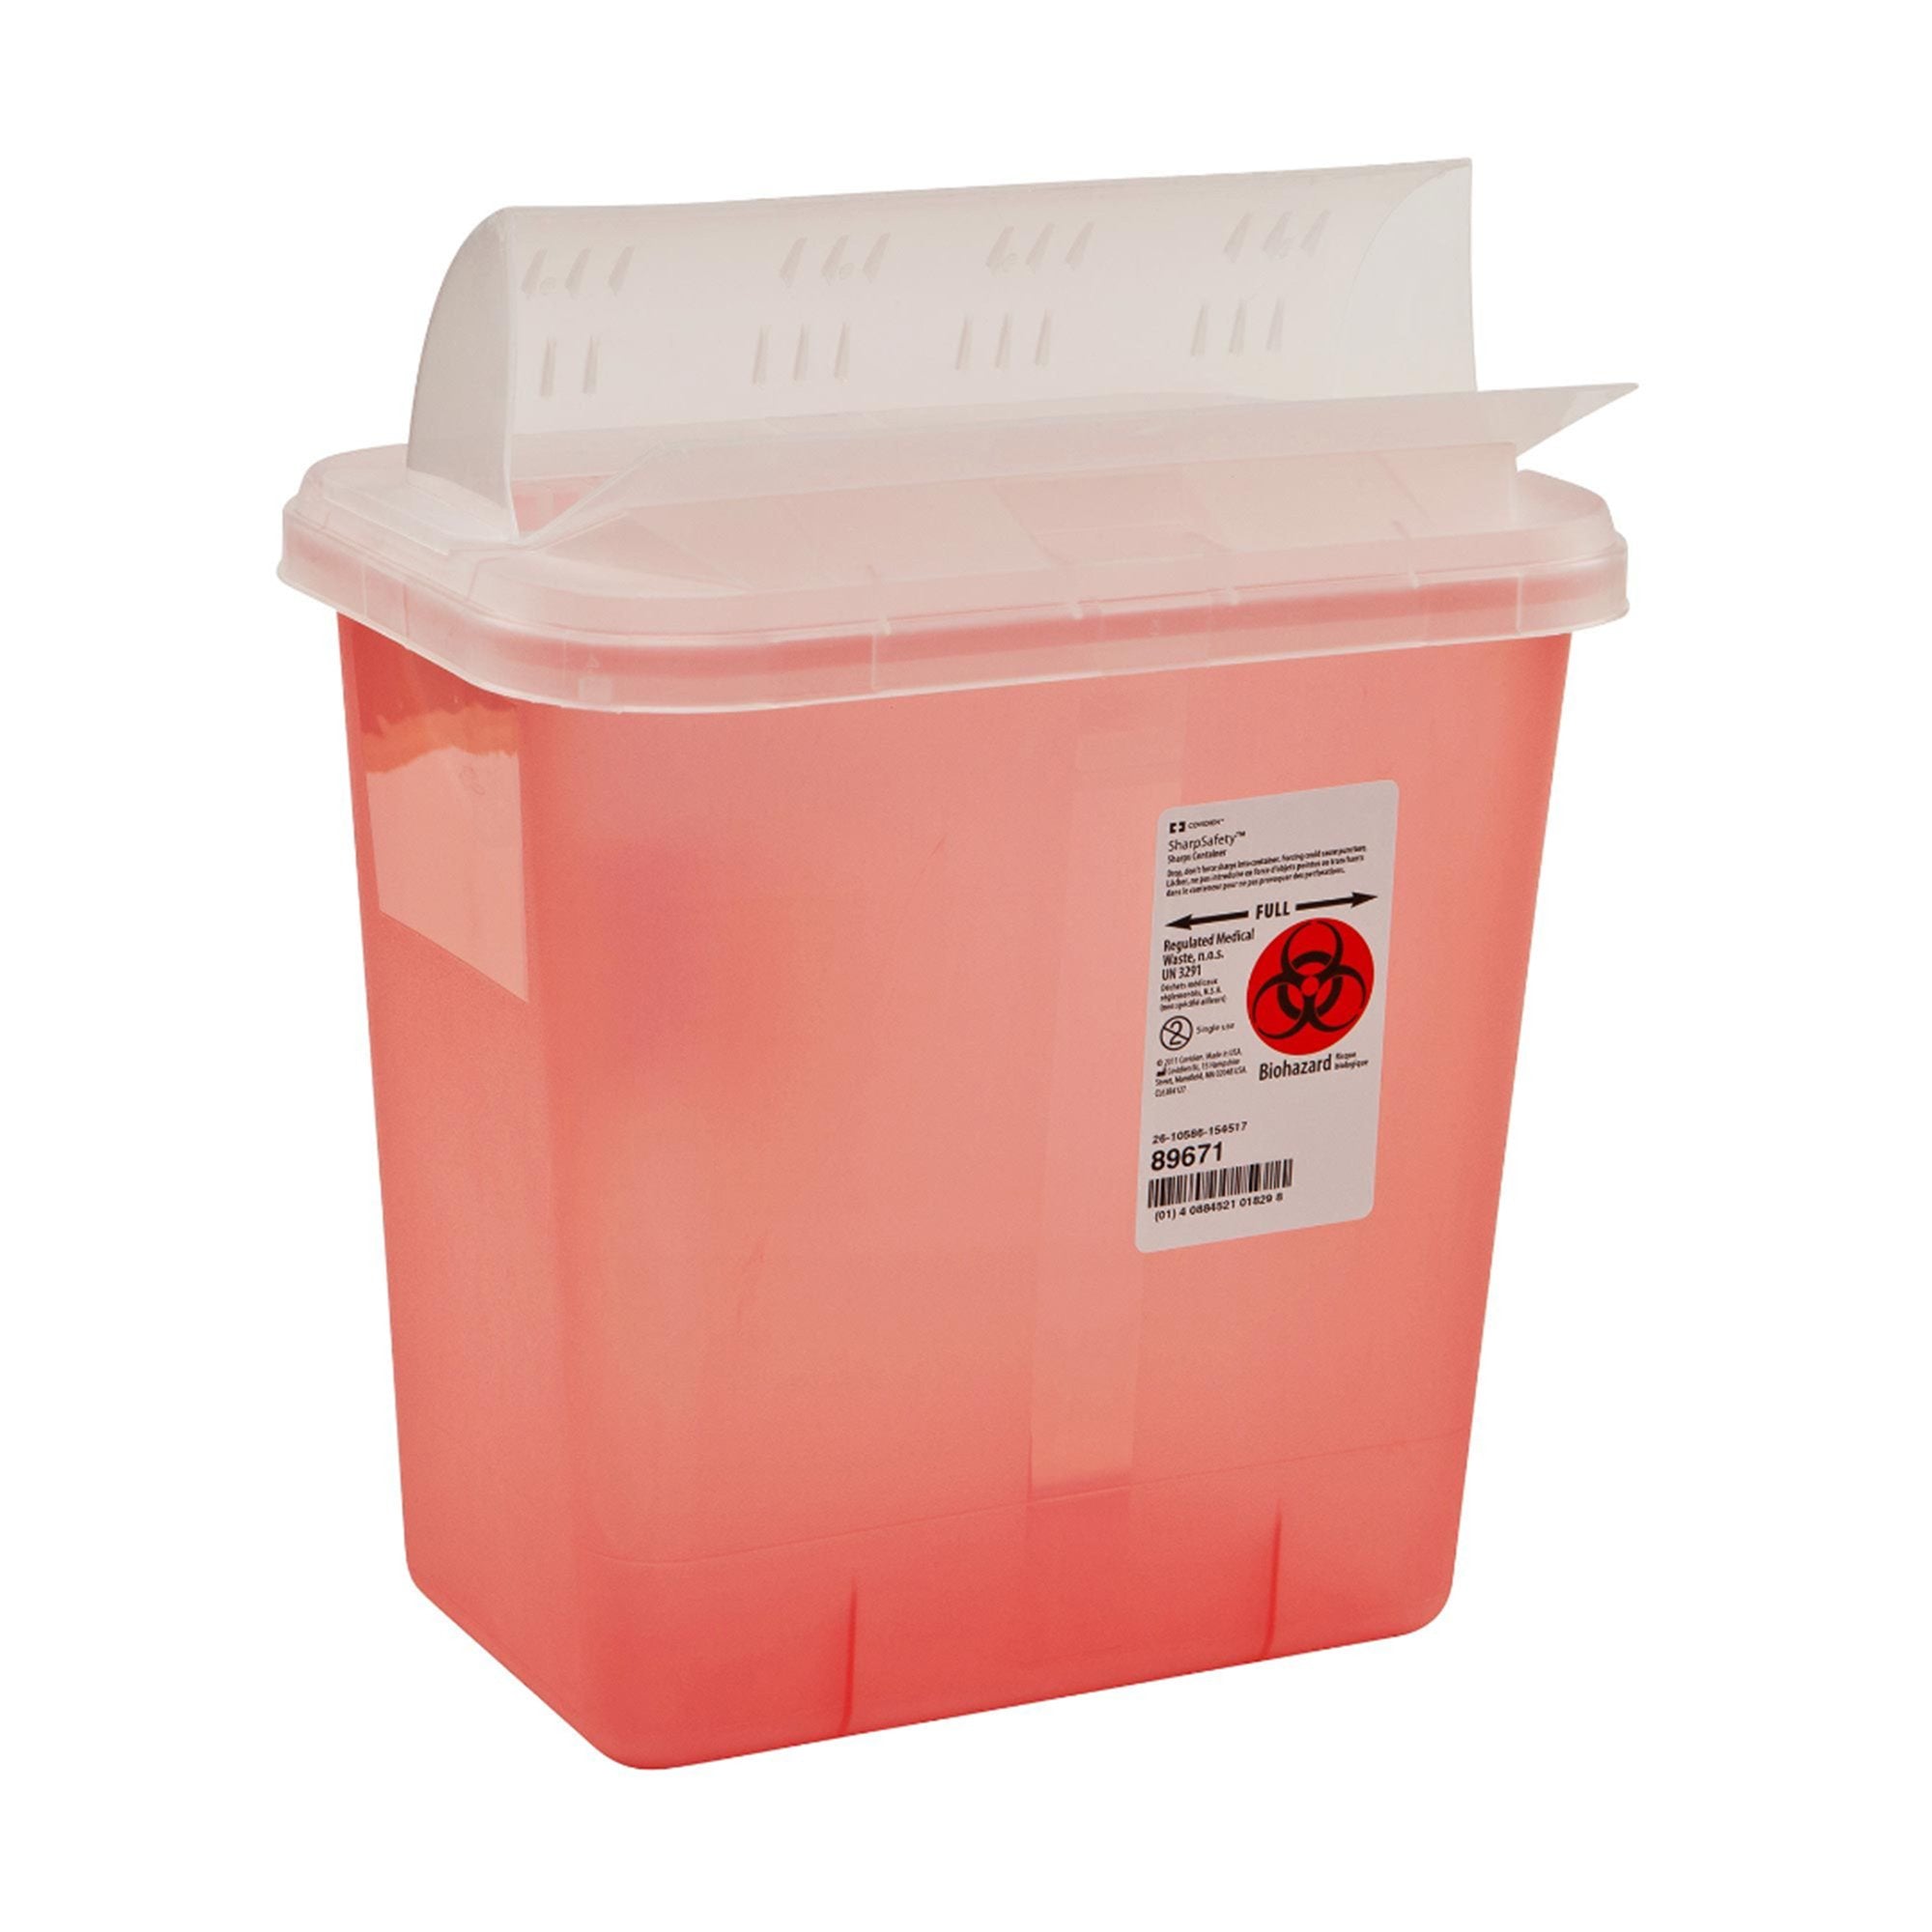 Sharps Container SharpSafety™ Translucent Red Base 12-3/4 H X 7-1/4 D X 10-1/2 W Inch Horizontal Entry 2 Gallon